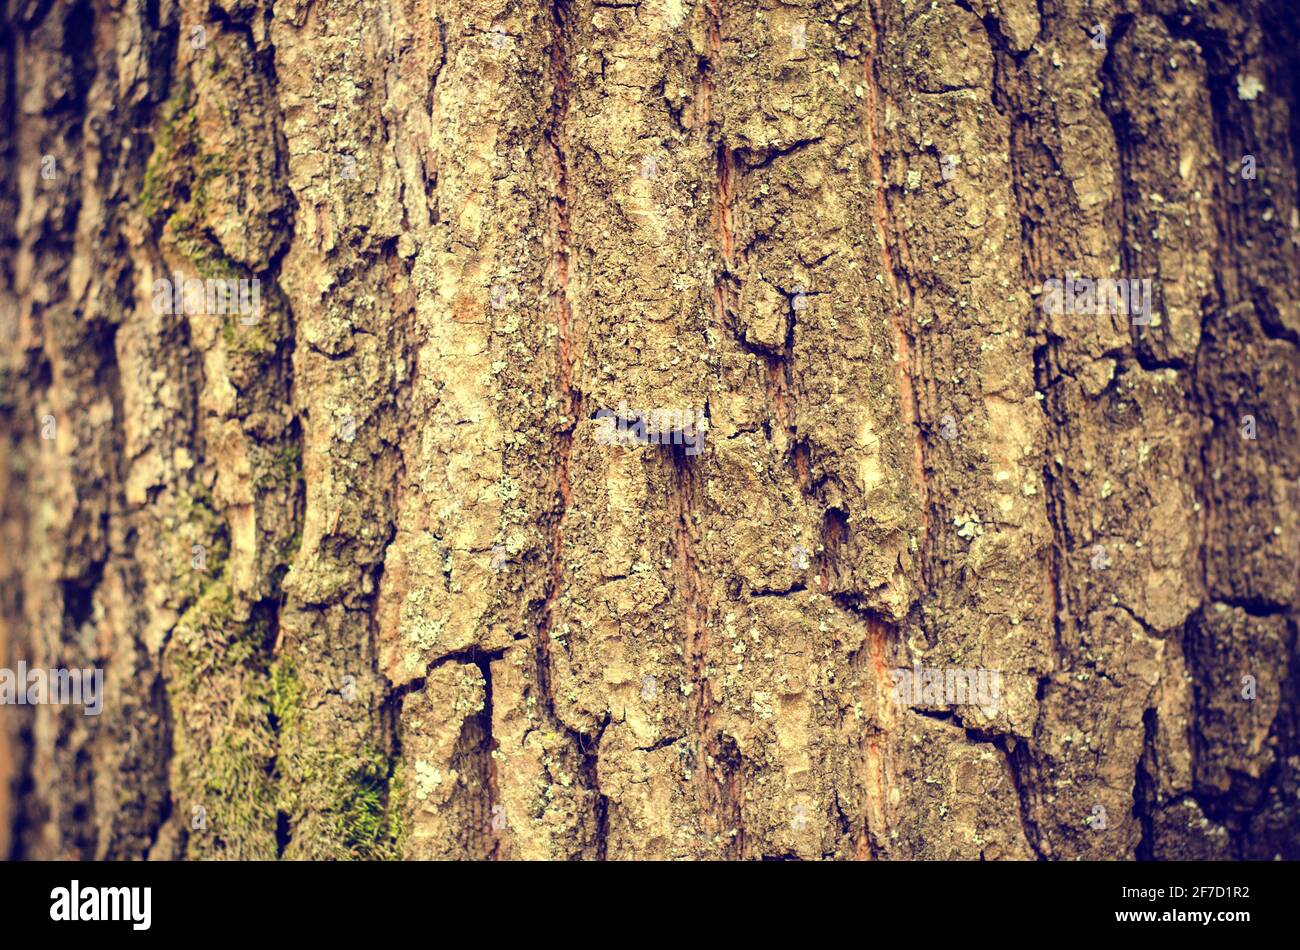 natural background of old textured bark Stock Photo